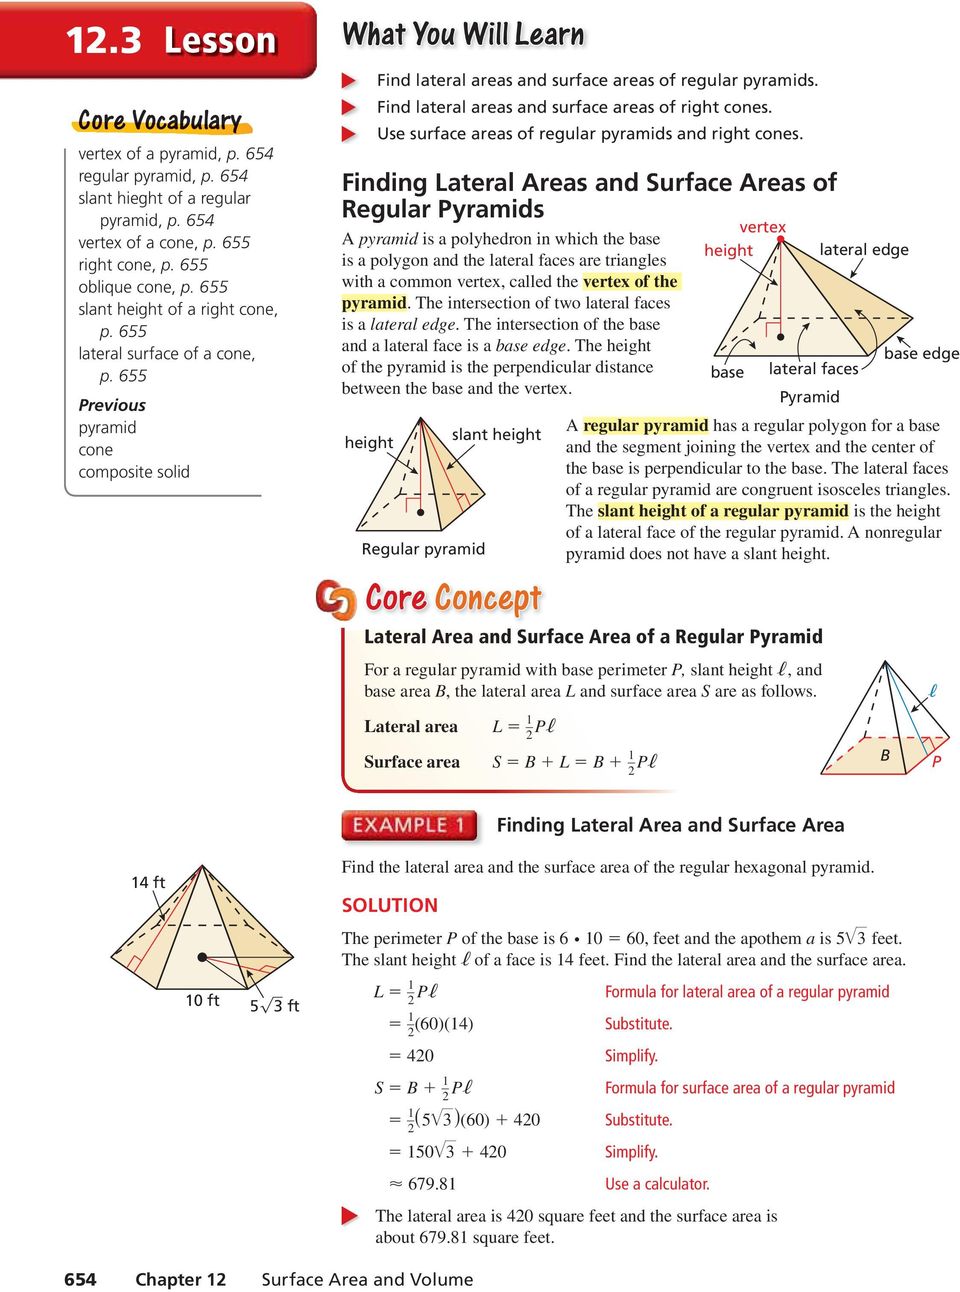 Find lateral areas and surface areas of right cones. Use surface areas of regular pyramids and right cones.